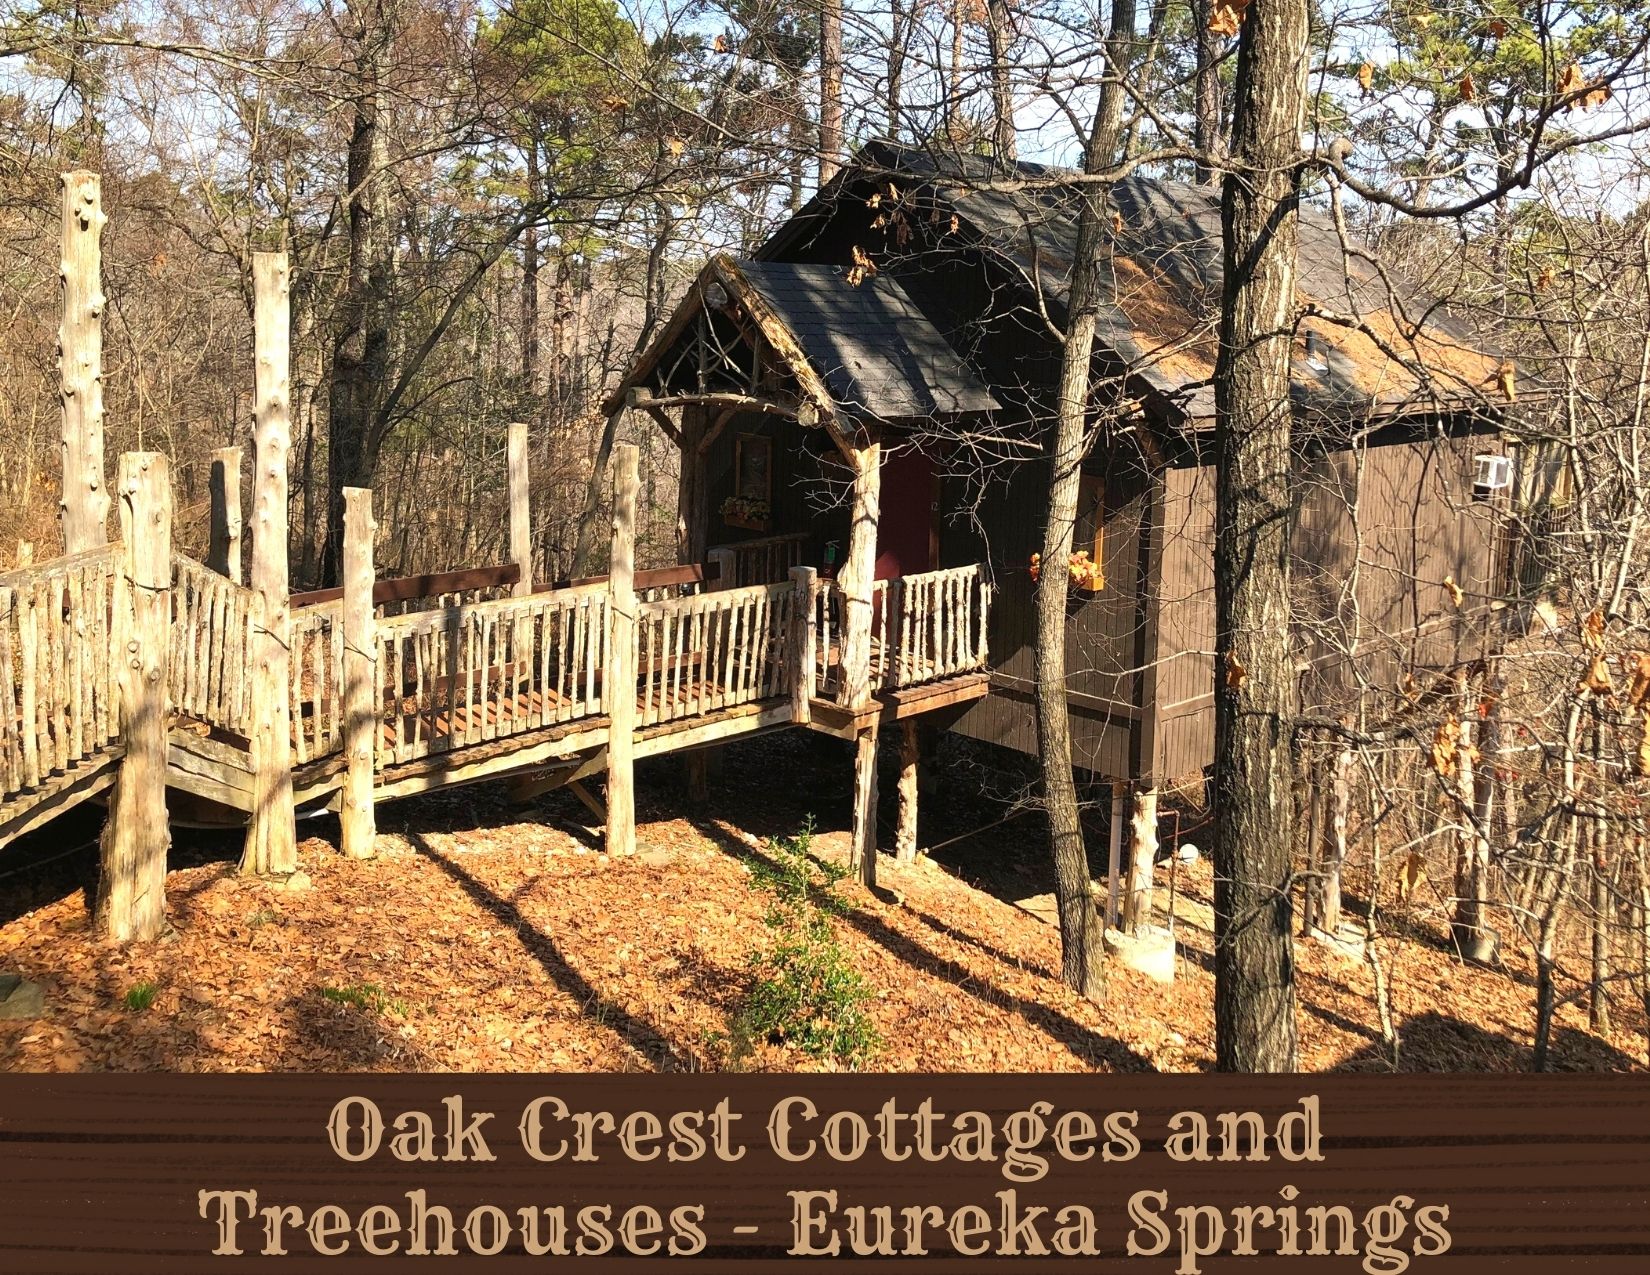 Eureka Springs Treehouses and Cottages